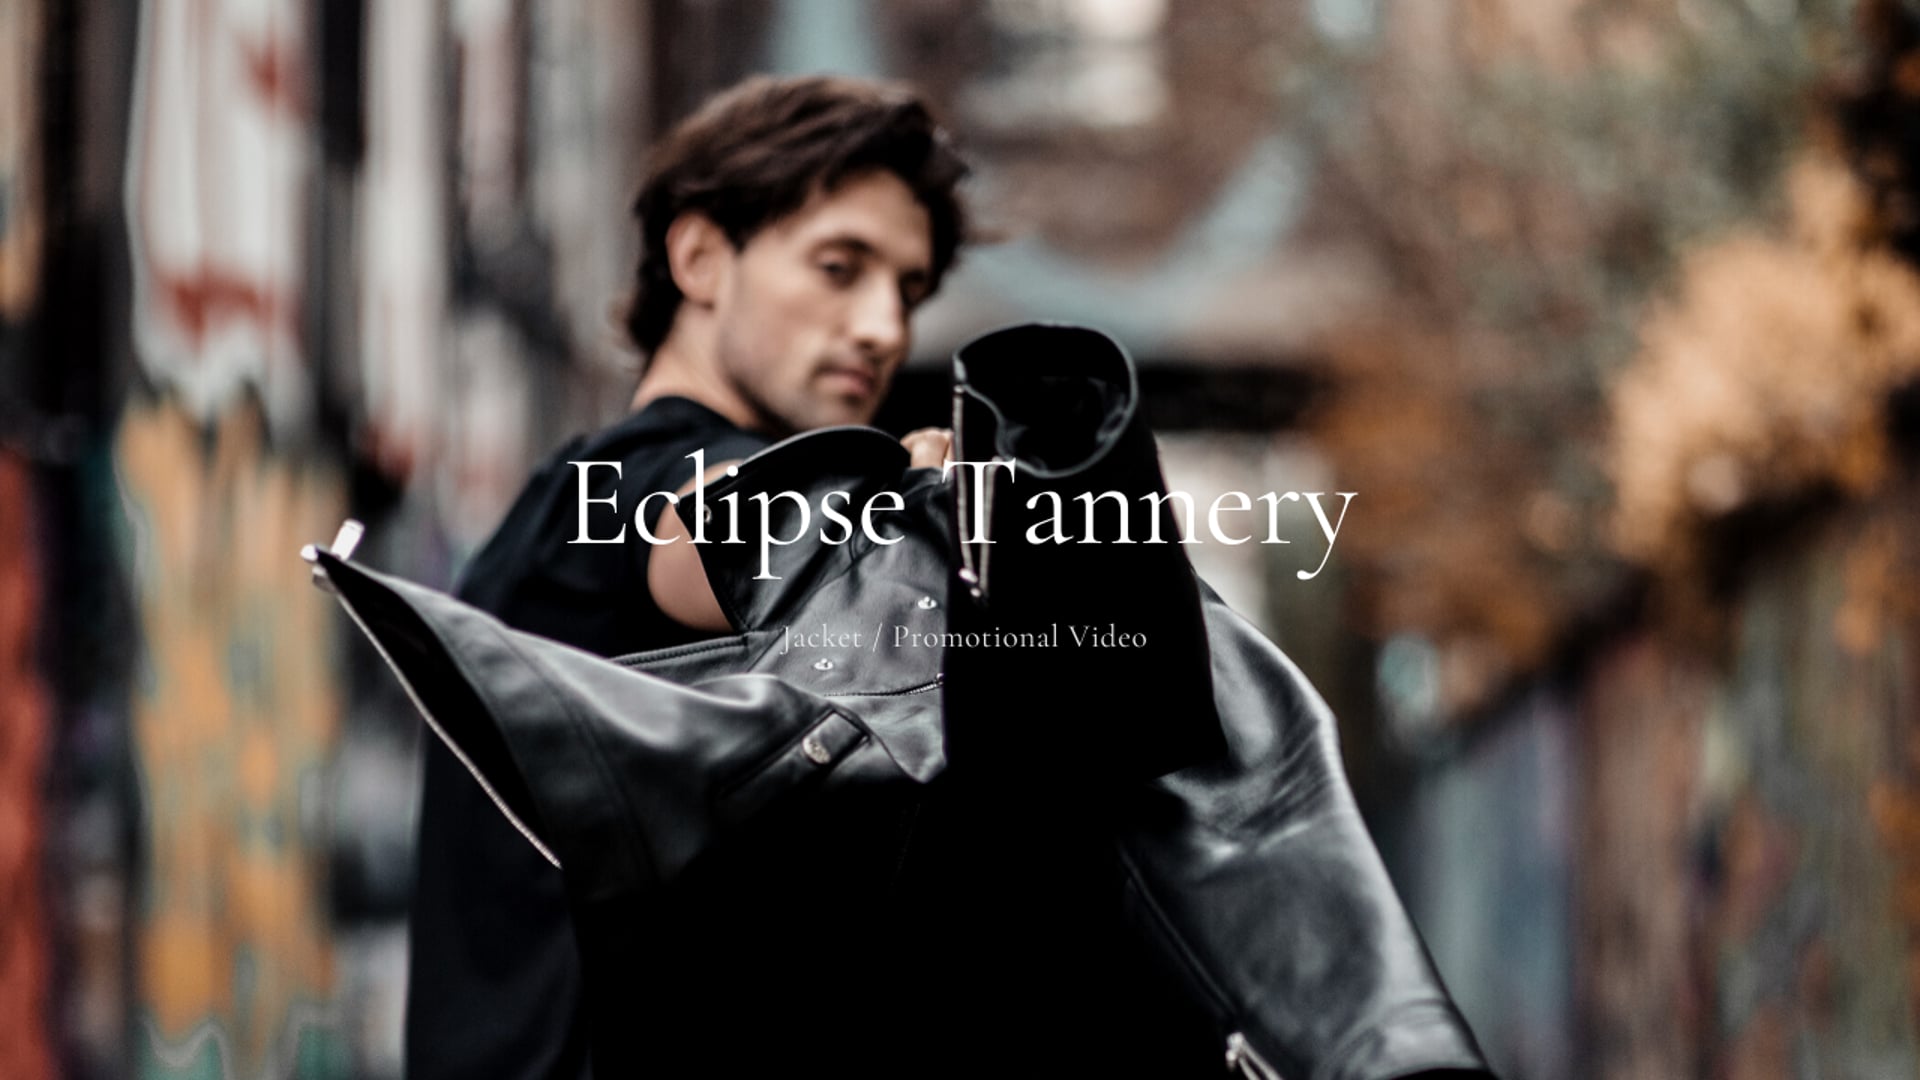 ECLIPSE TANNERY / Jacket / Promotional Video